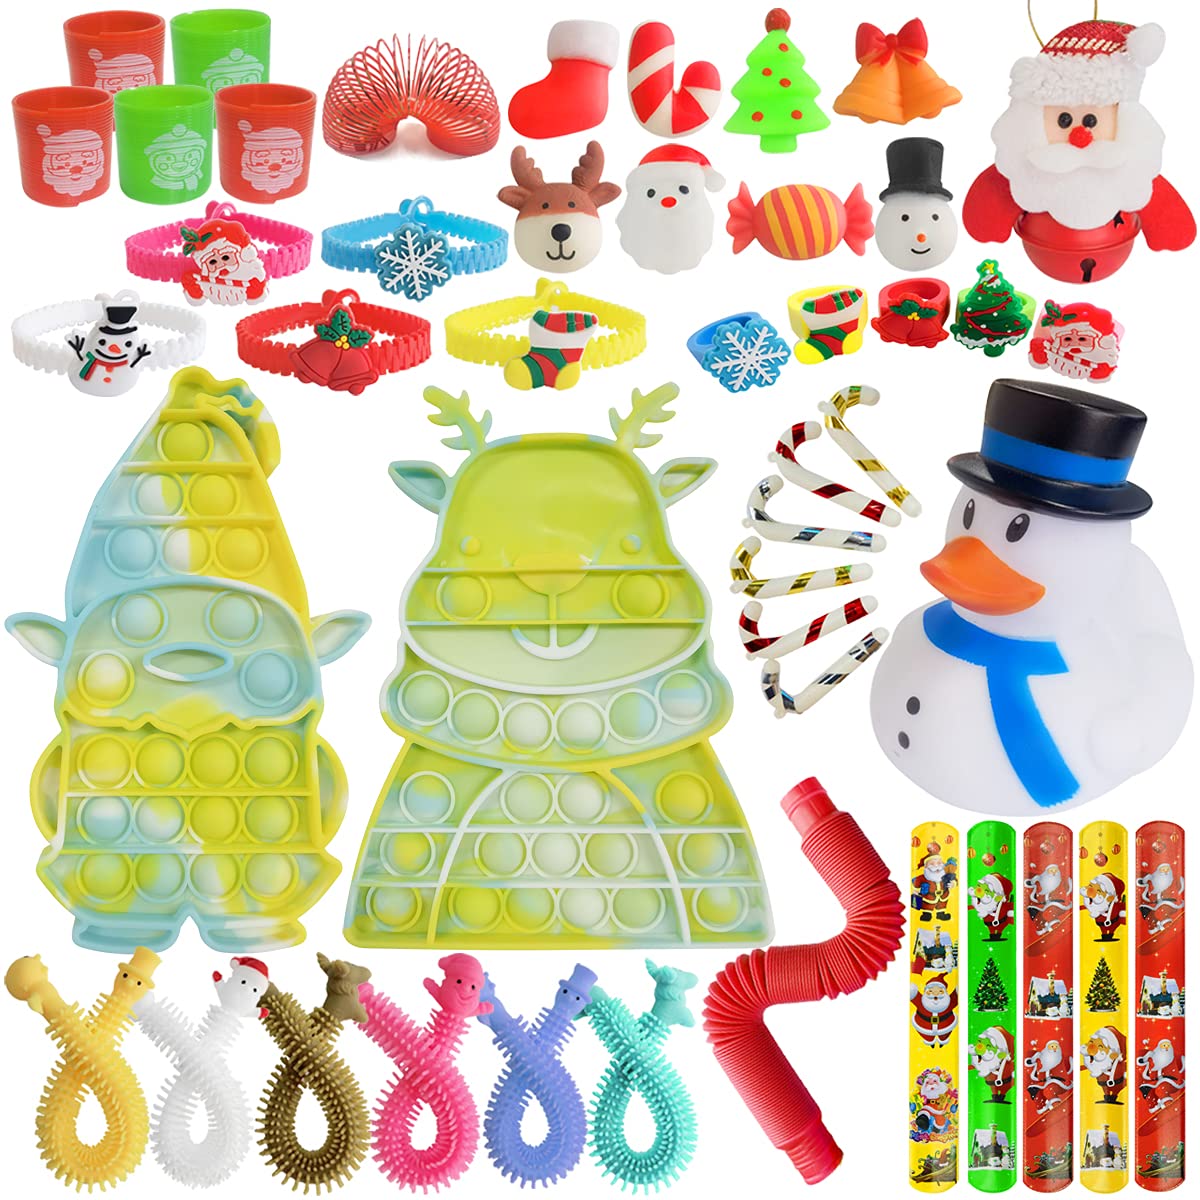 Christmas Pop Fidget Toy Packs Dimple Stress Relief Fidget Toys for Kids Party Favors Stocking Stuffers (Christmas-44)